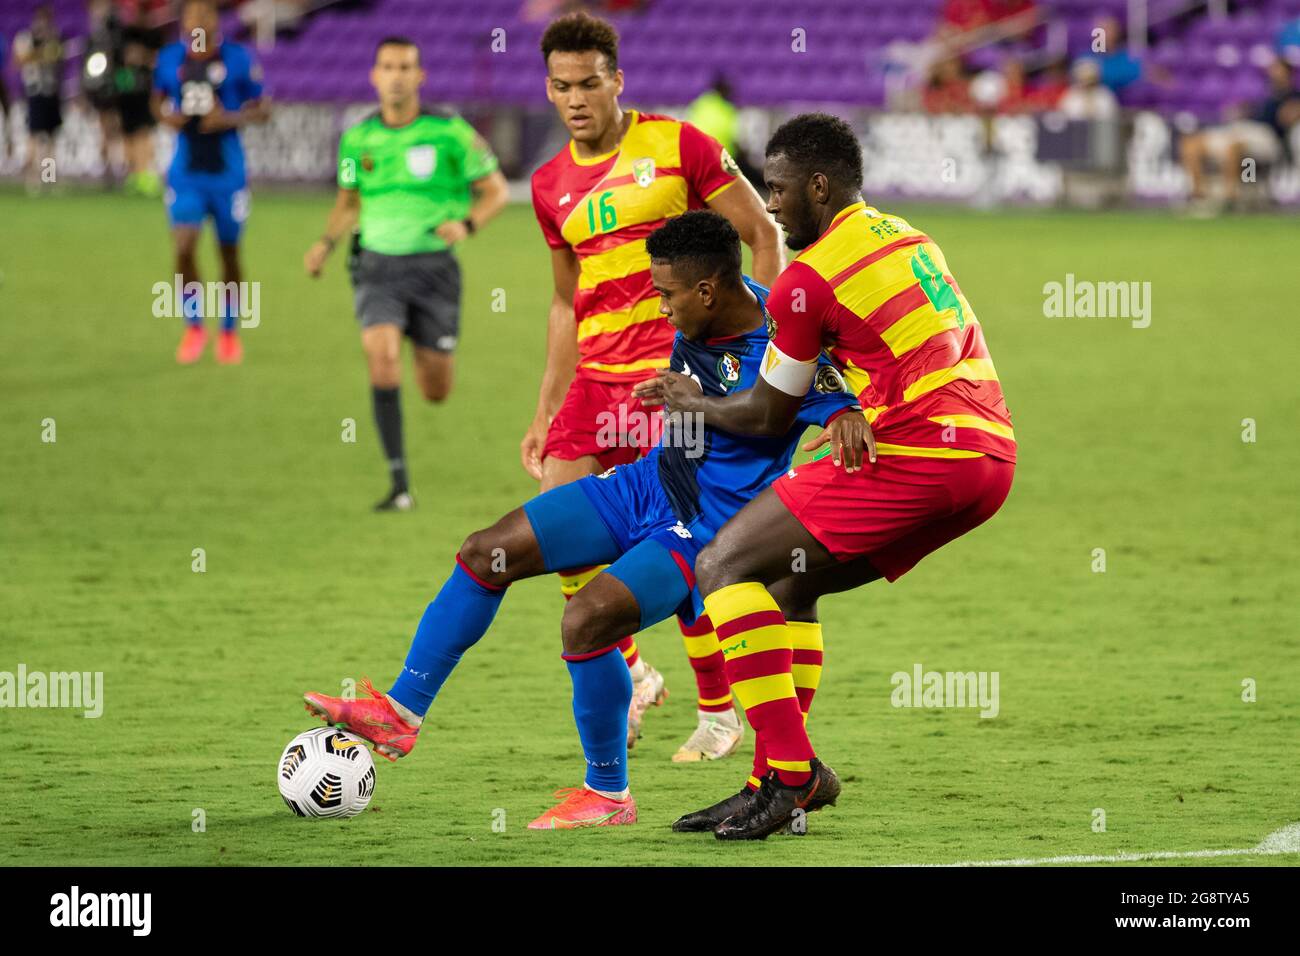 Orlando, United States. 21st July, 2021. Edgar Barcenas /910 Panama) struggles to pass the ball forward as Aaron Pierre (4 Grenada) battles to make a tackle during the CONCACAF Gold Cup game between Panama and Grenada at Exploria Stadium in Orlando, Florida. NO COMMERCIAL USAGE. Credit: SPP Sport Press Photo. /Alamy Live News Stock Photo